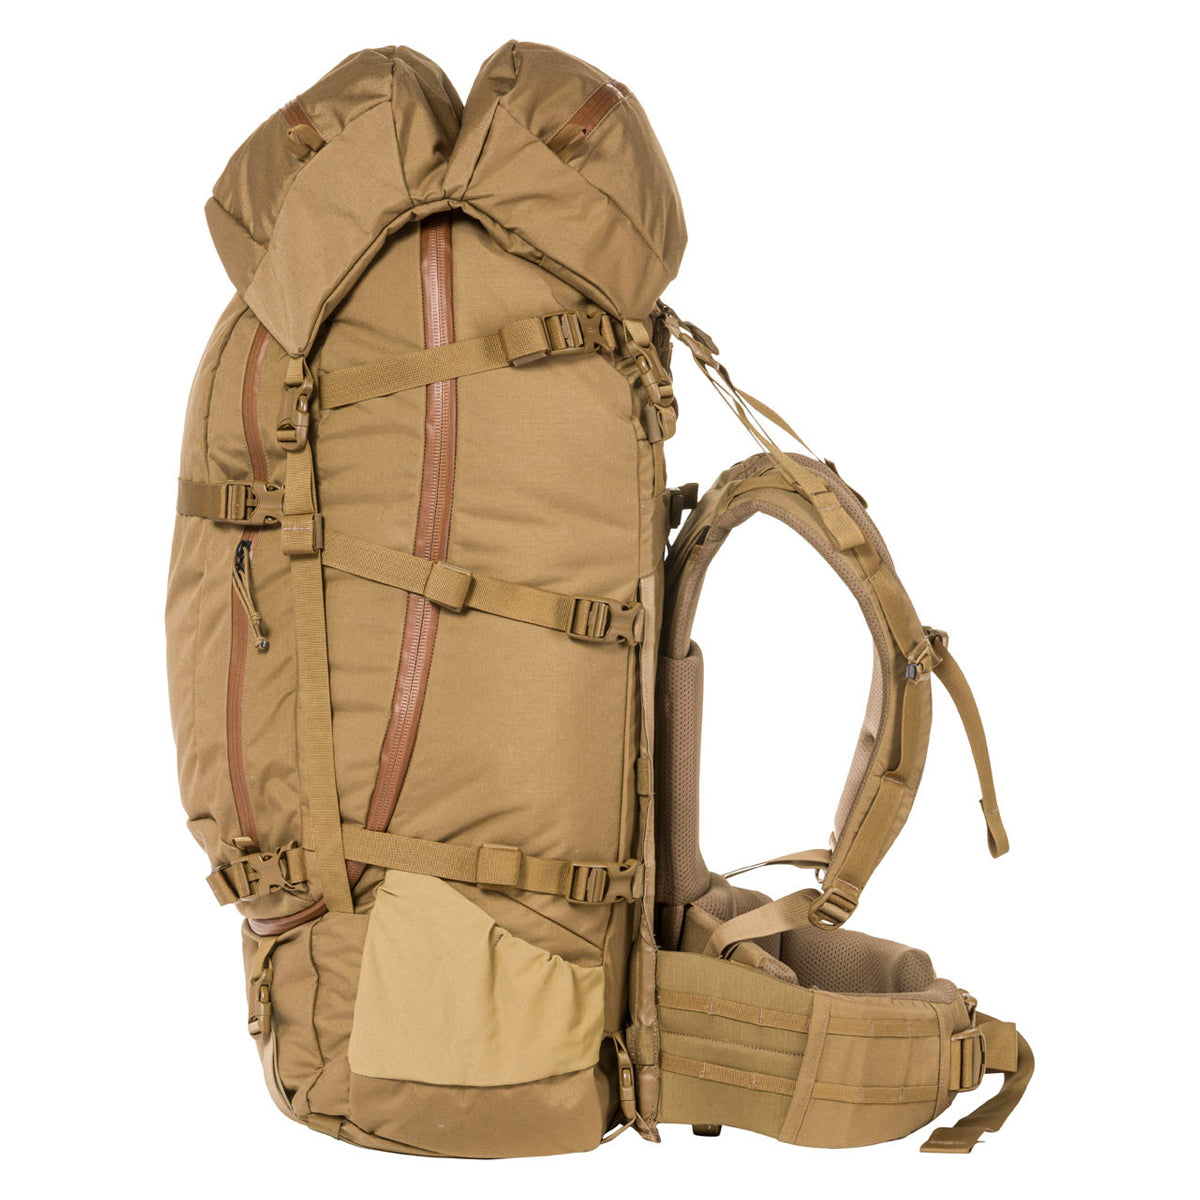 Mystery Ranch Beartooth 80 Backpack in Mystery Ranch Beartooth 80 Backpack by Mystery Ranch | Gear - goHUNT Shop by GOHUNT | Mystery Ranch - GOHUNT Shop